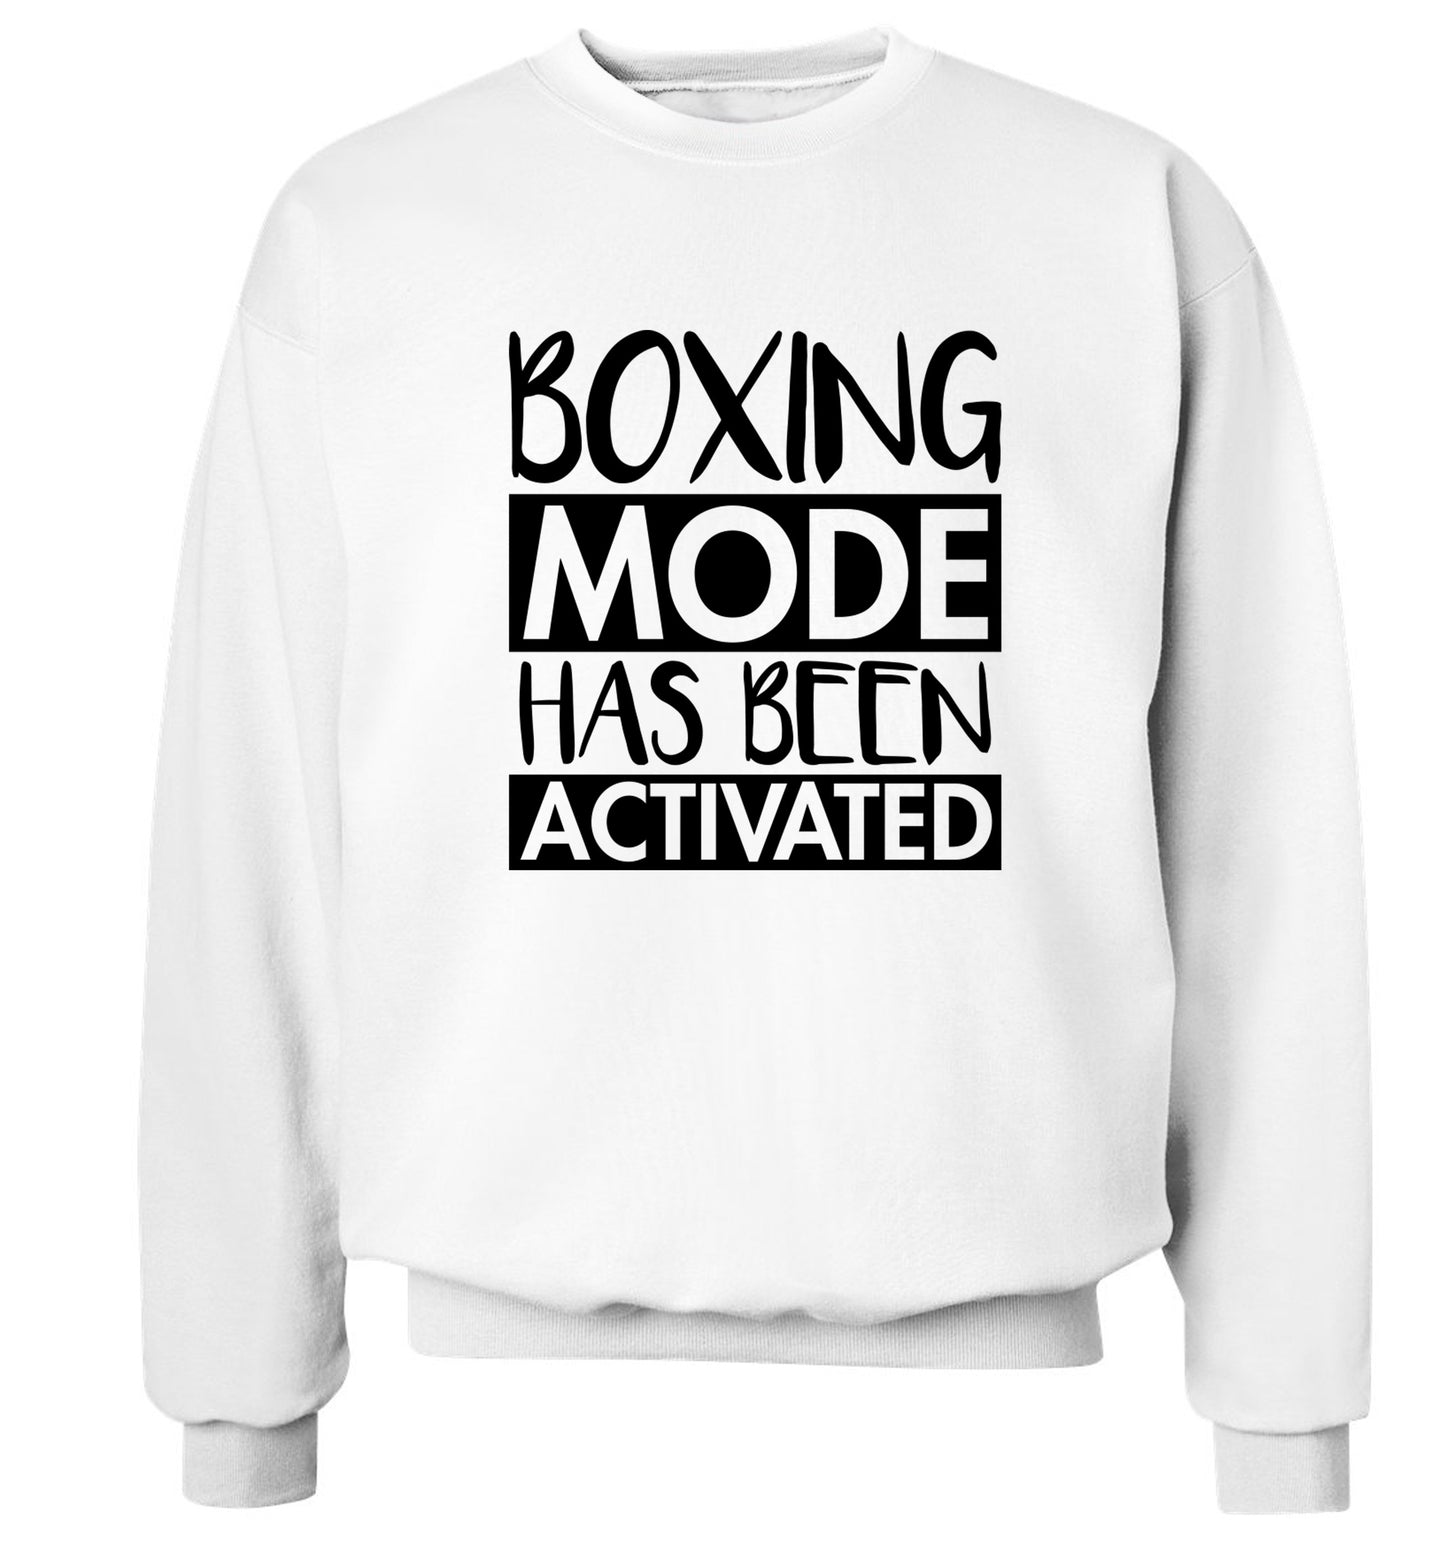 Boxing mode activated Adult's unisex white Sweater 2XL